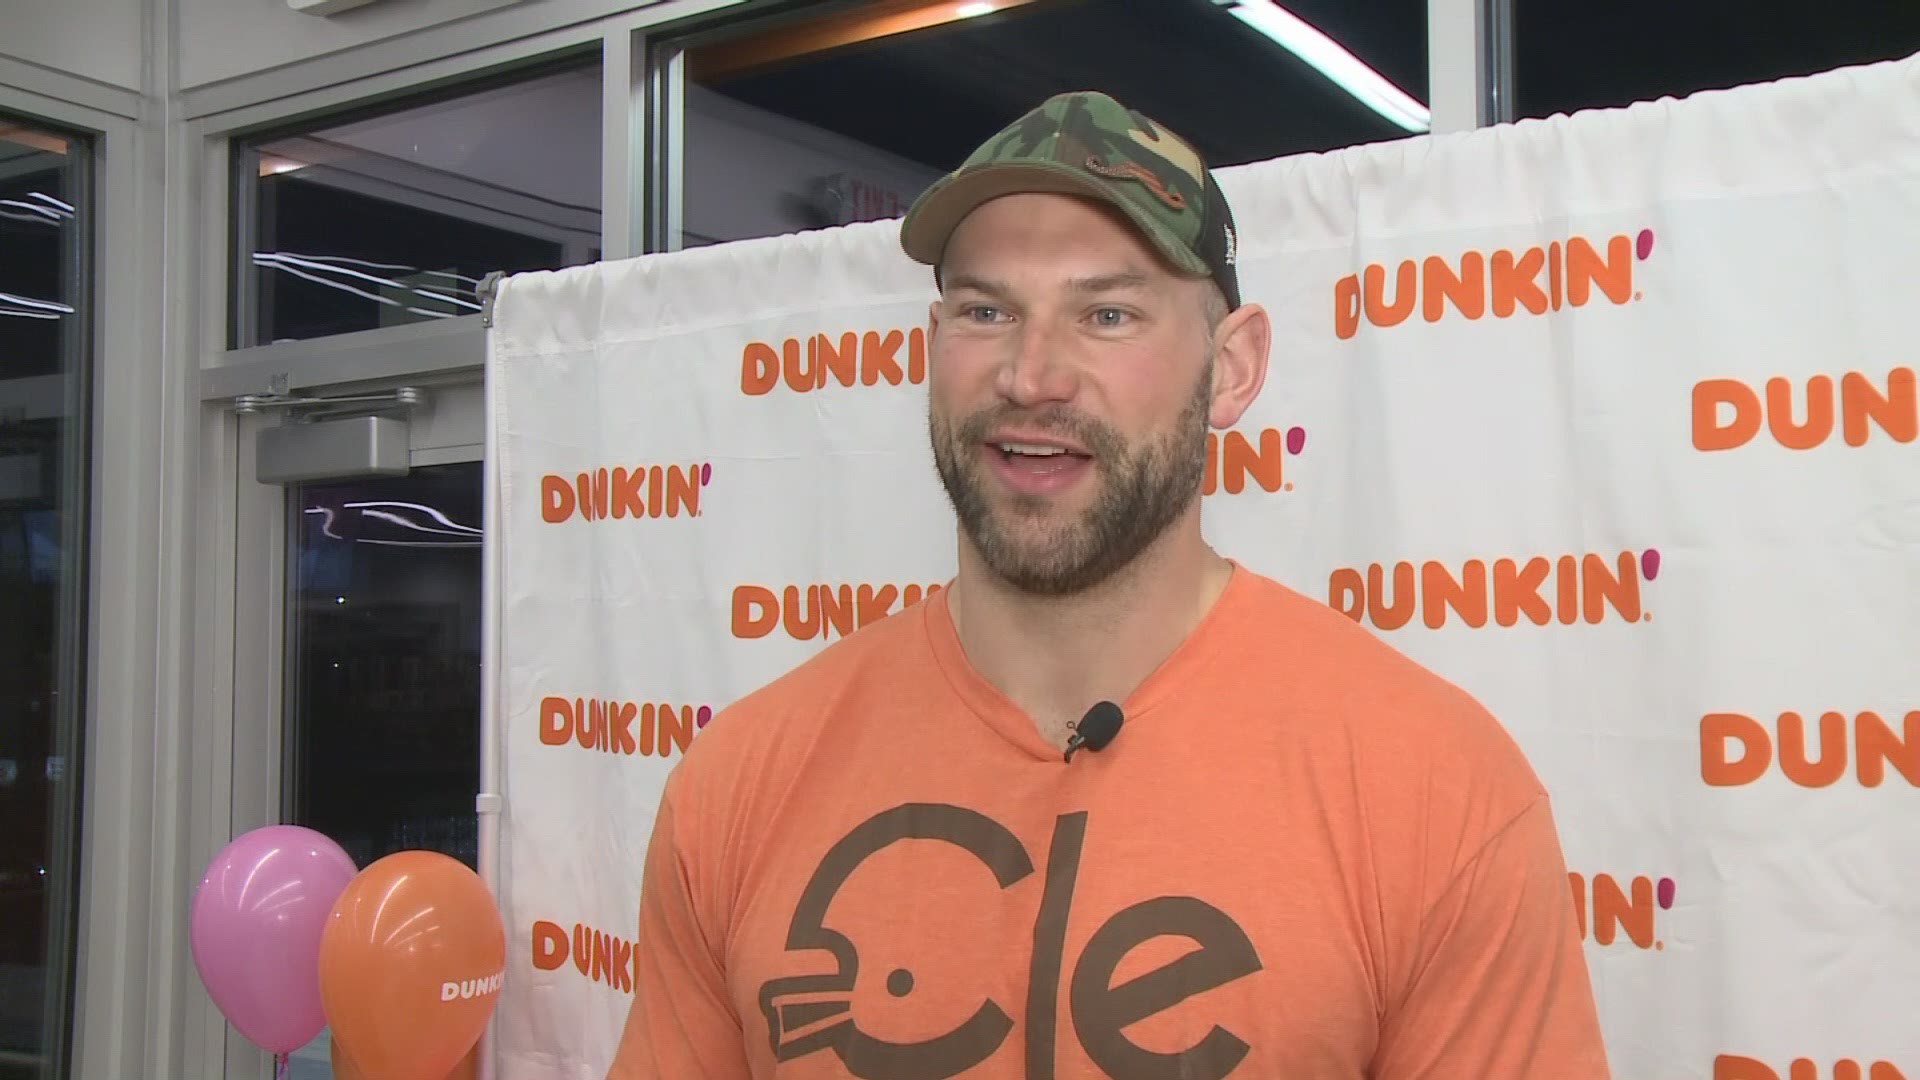 Former Cleveland Browns left tackle Joe Thomas handed out coffee at an Avon Dunkin Donuts. He also discussed Myles Garrett's actions against the Pittsburgh Steelers.